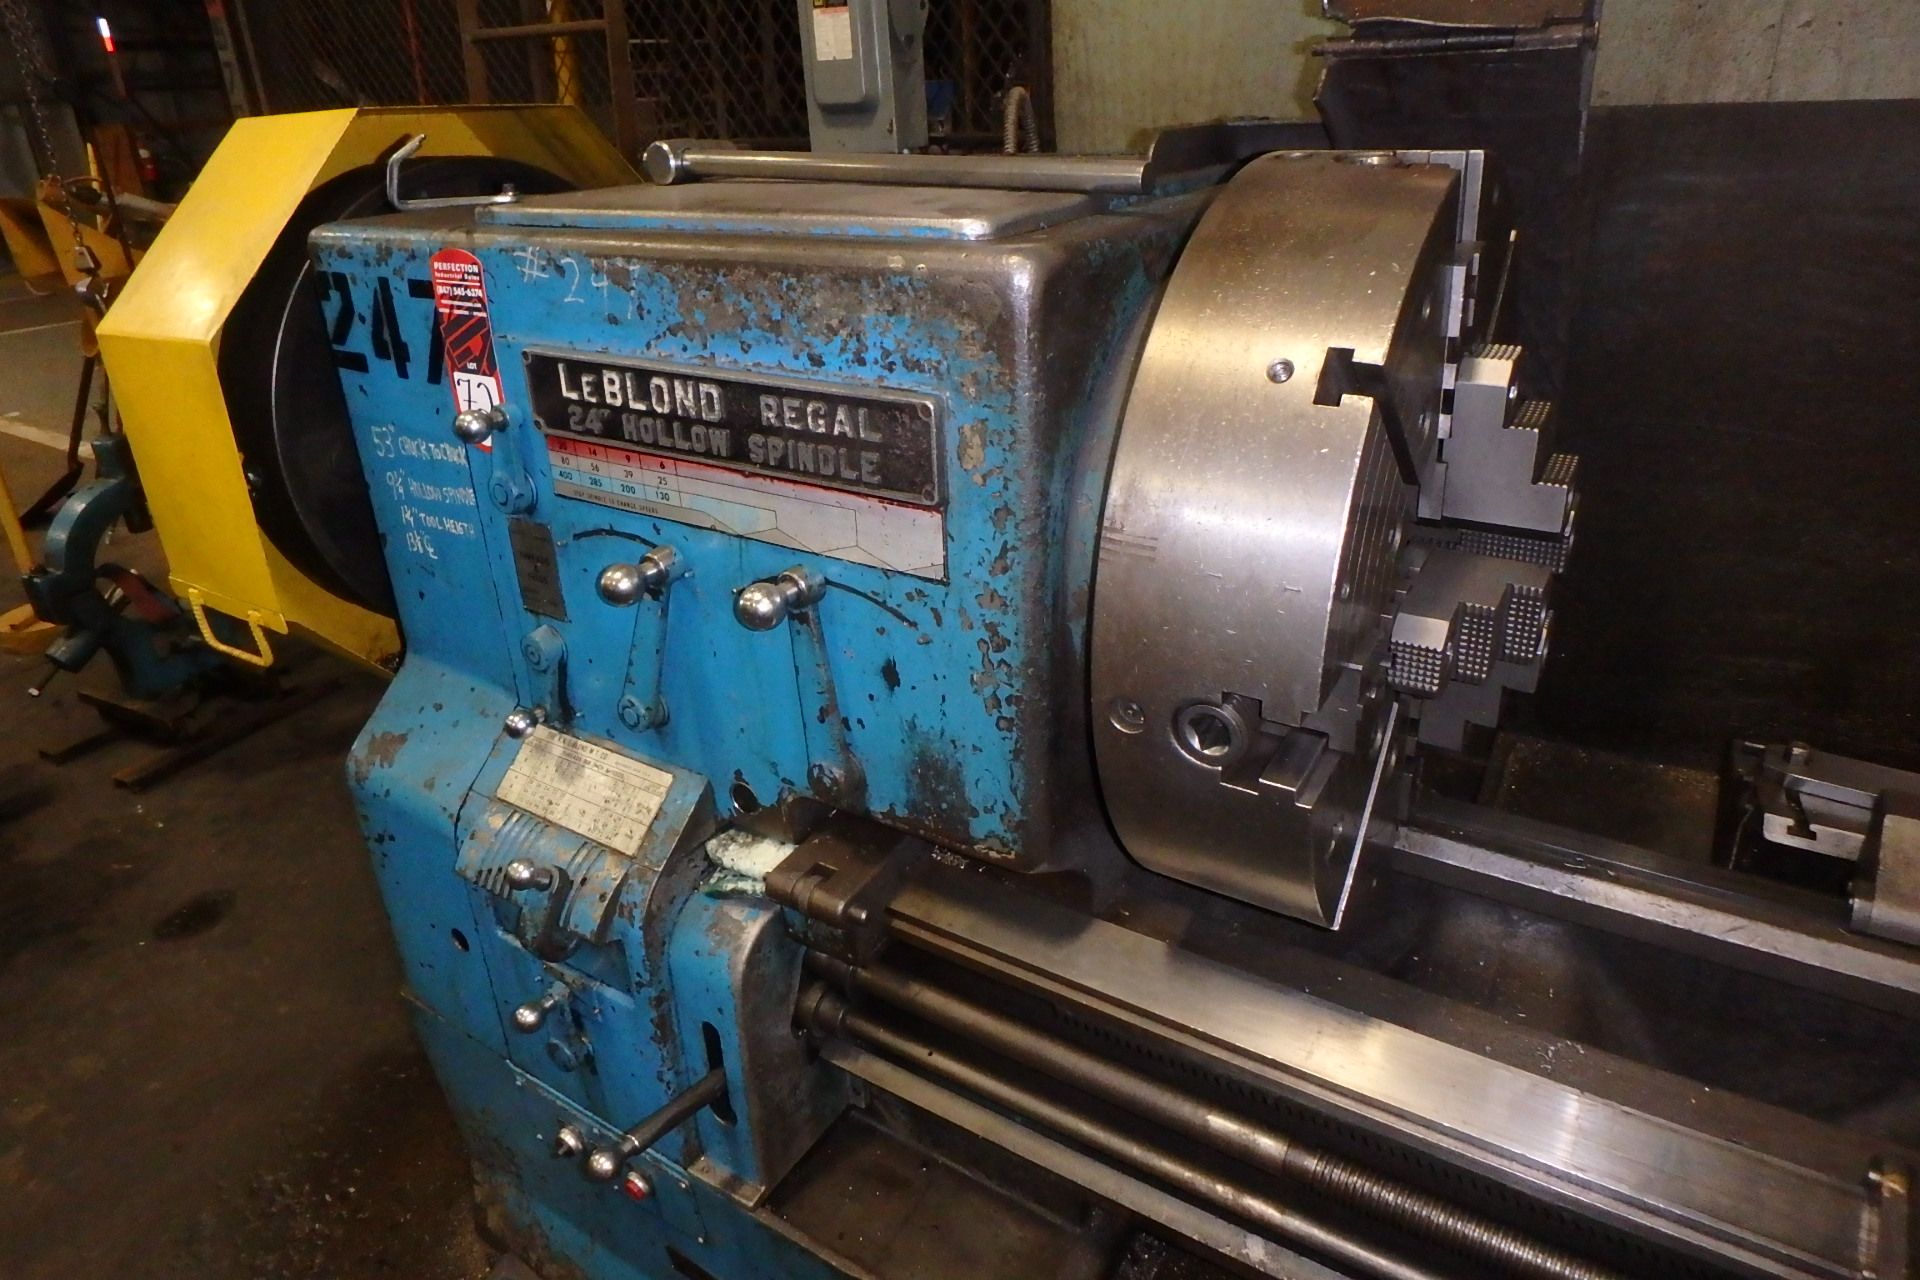 LEBLOND REGAL 28" x 60" Hollow Spindle Lathe, s/n 2H599, w/ 9" Spindle Hole, 24" 4-Jaw Chuck, 9- - Image 3 of 4